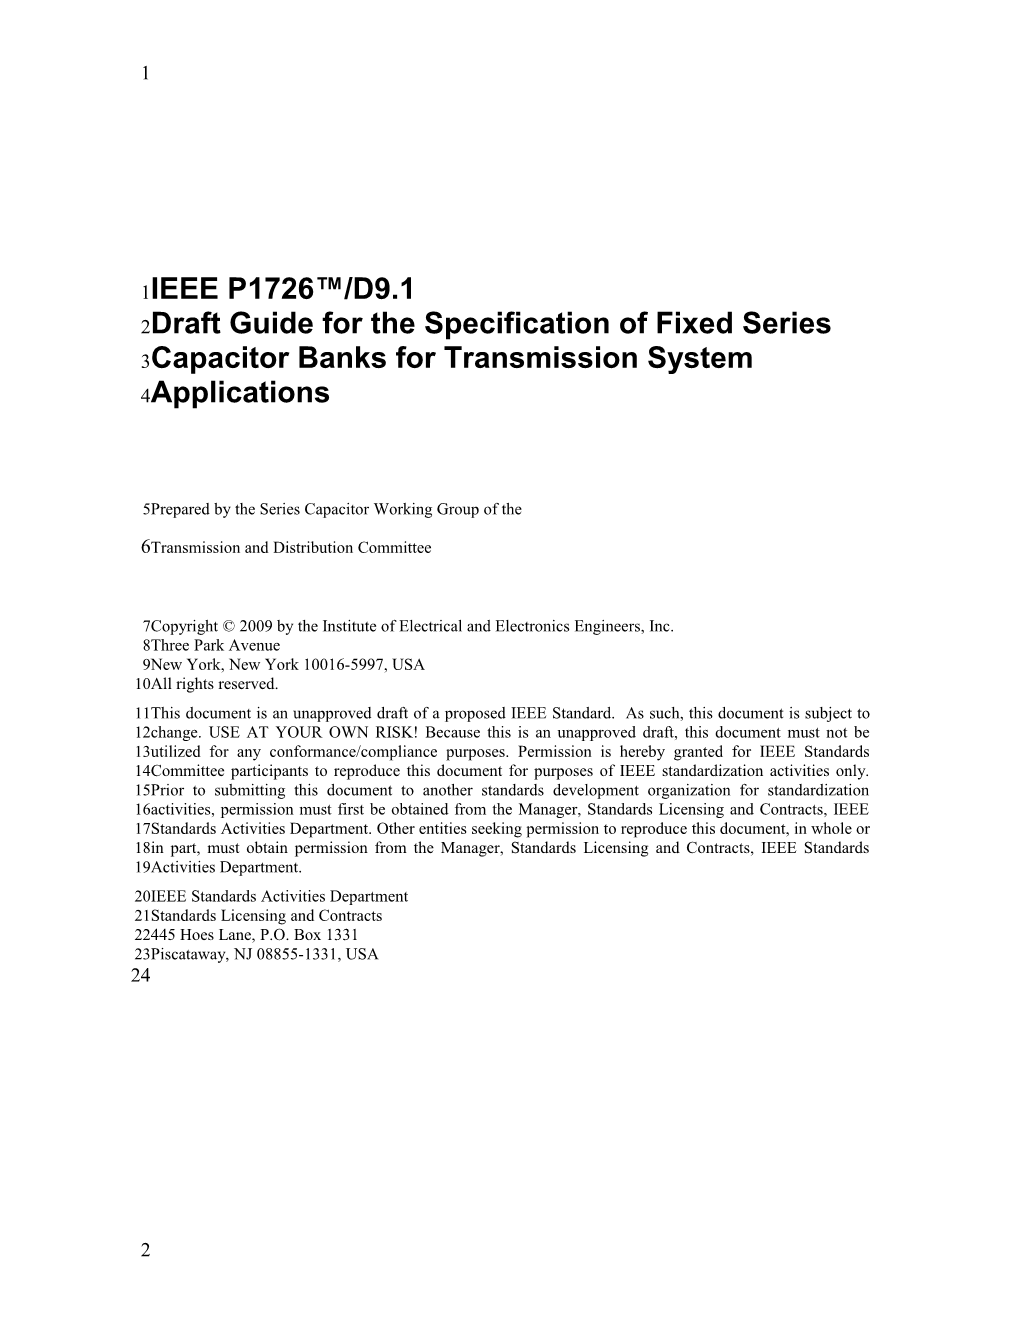 IEEE Draft Guide for the Specification of Fixed Series Capacitor Banks for Transmission